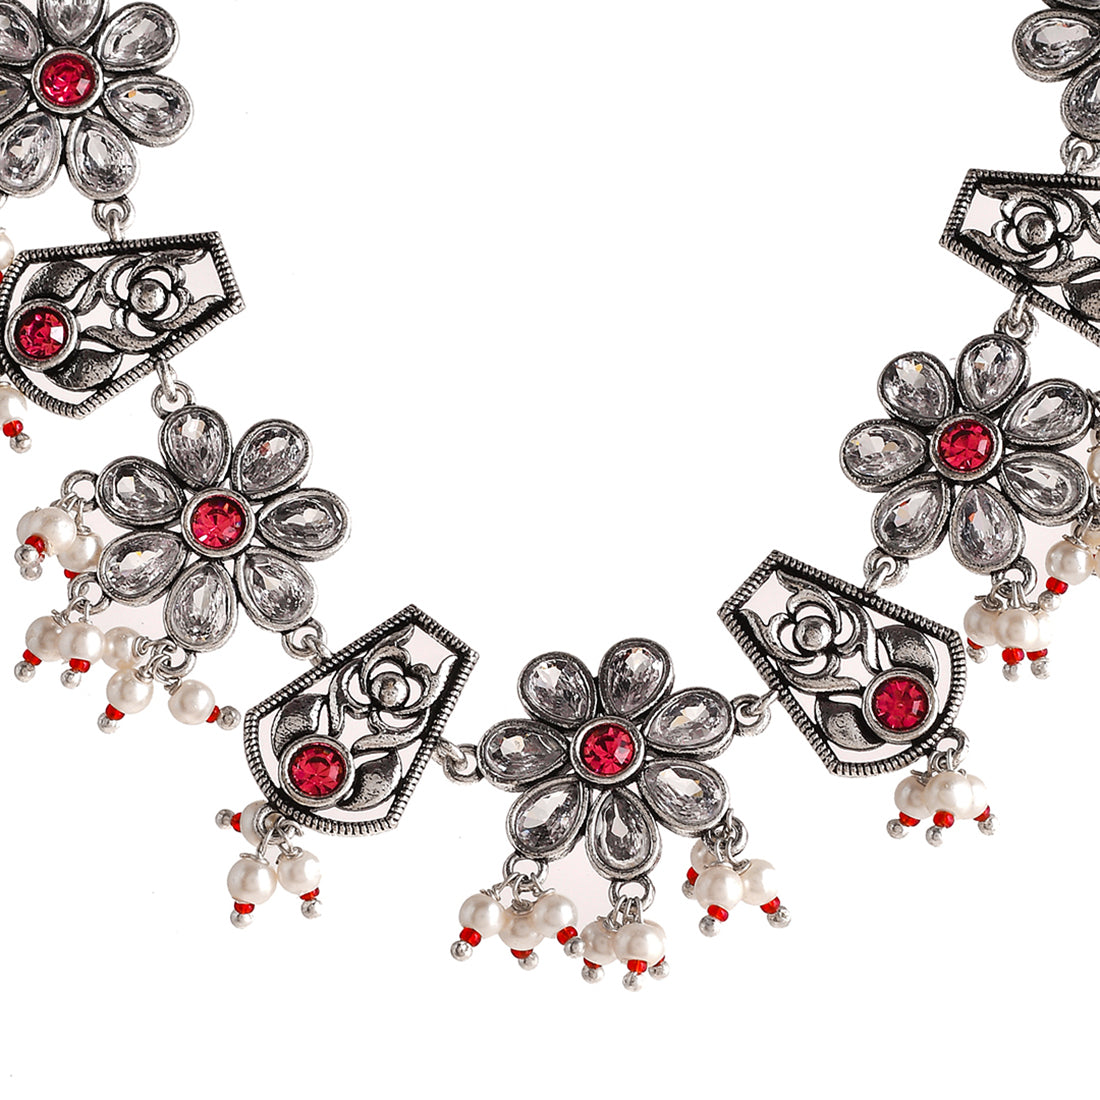 Abharan White Stones and Pearls Floral Jewellery Set